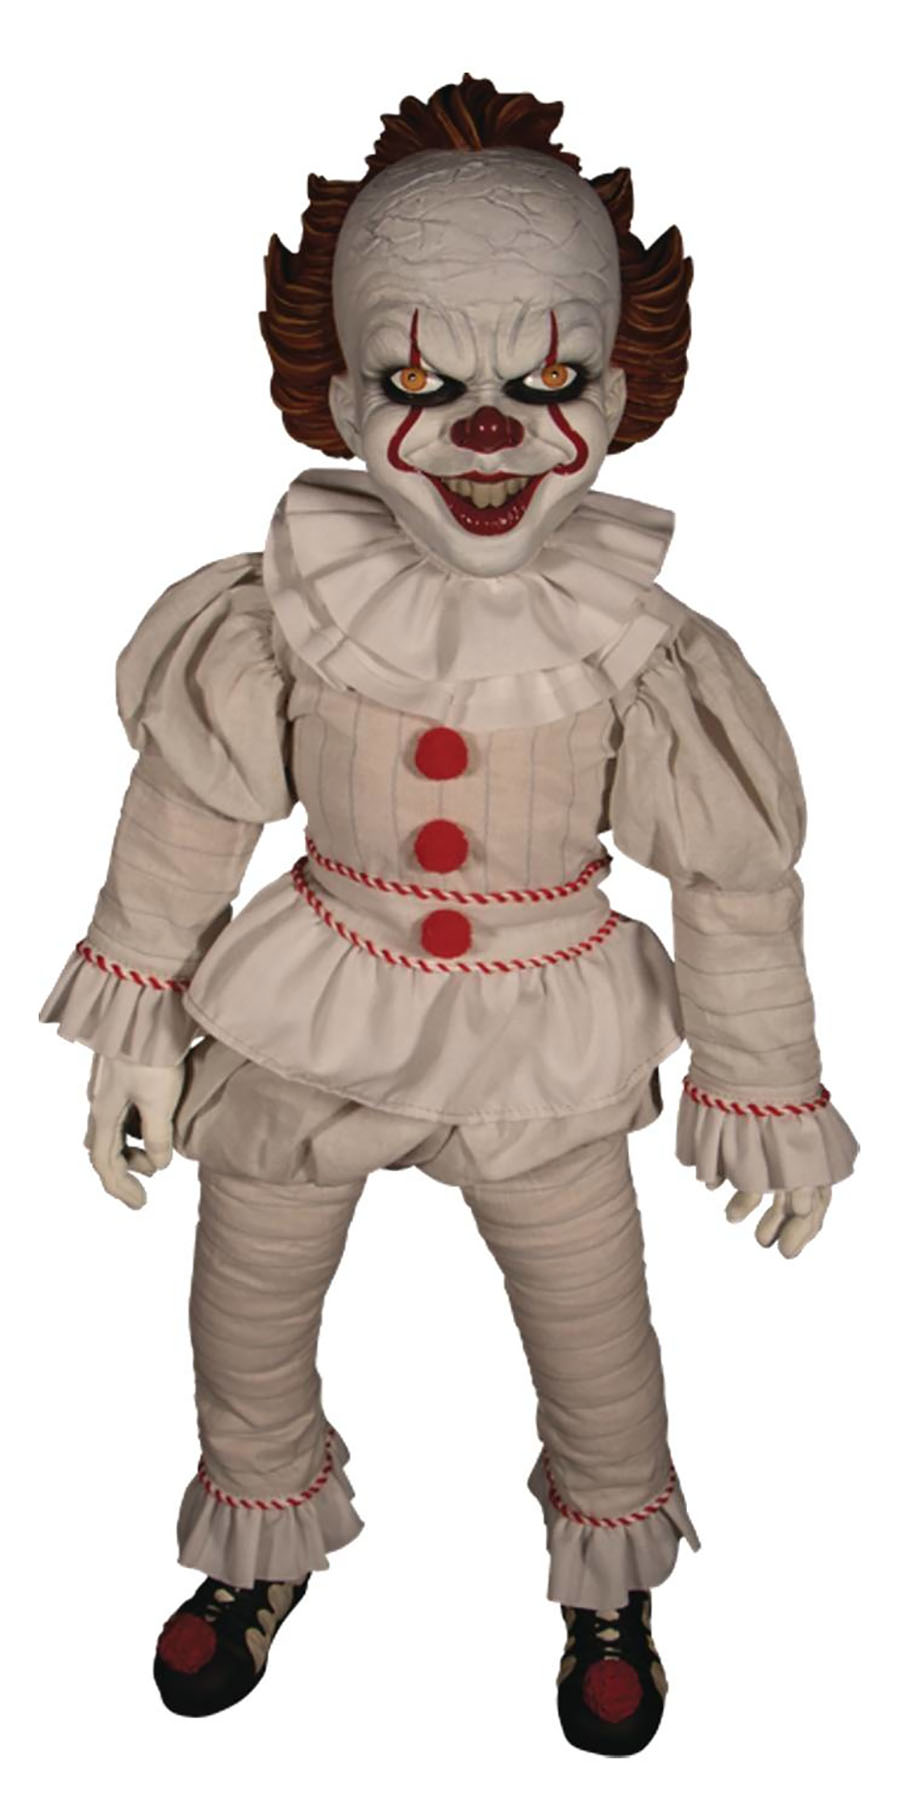 IT 2017 Pennywise 18-Inch Rotocast Plush Doll - RESOLICITED